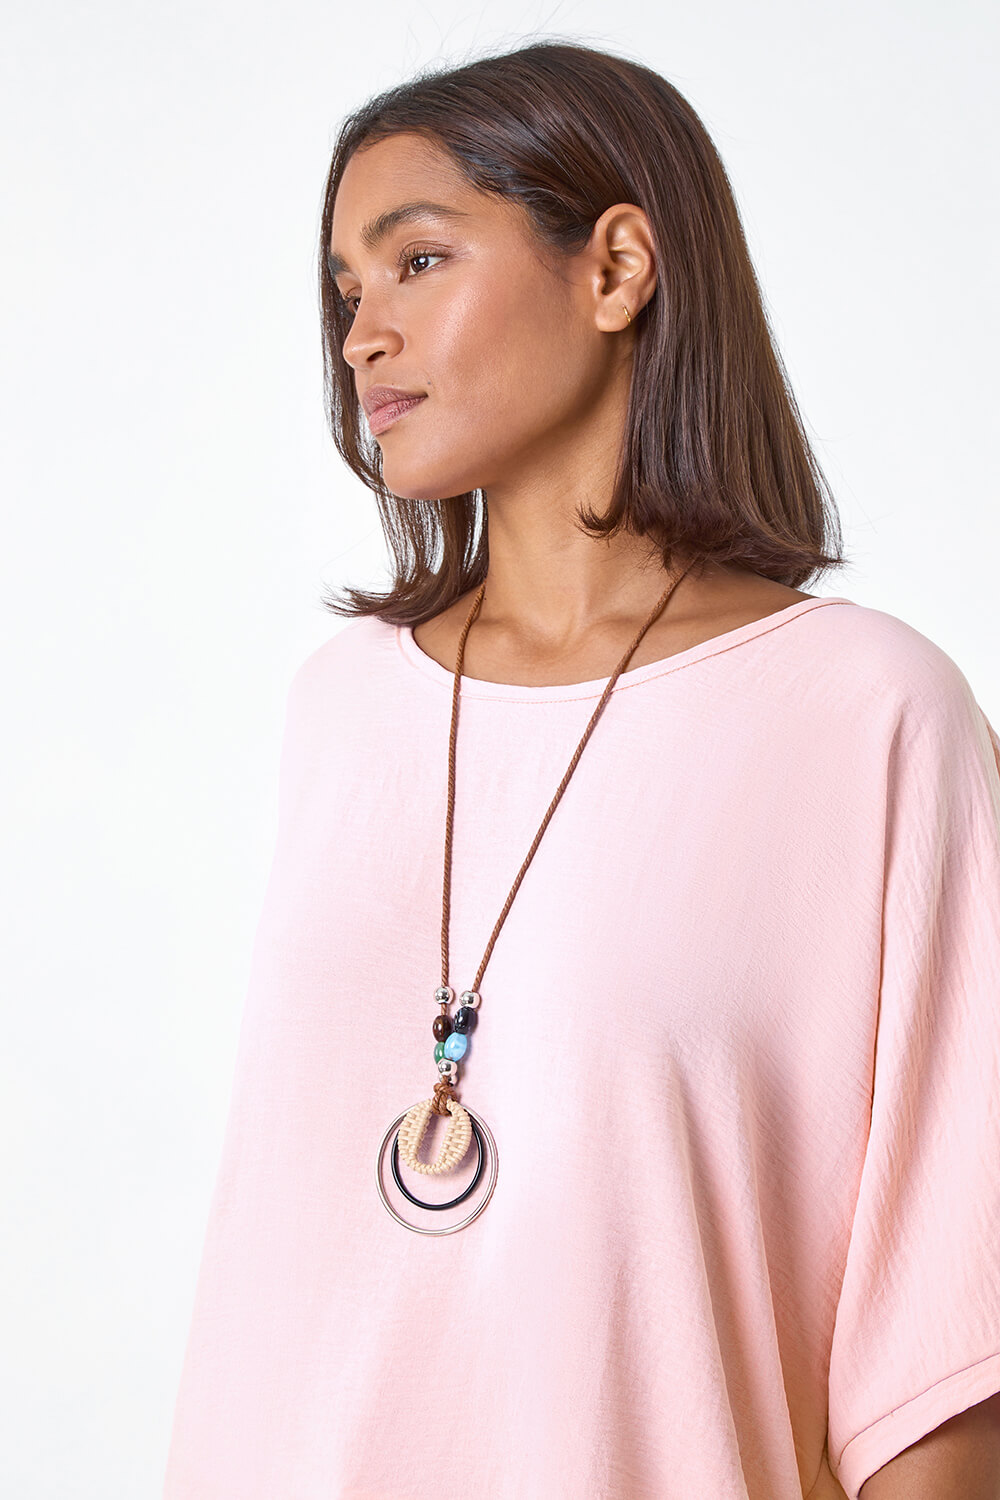 Plain Tunic Top with Necklace